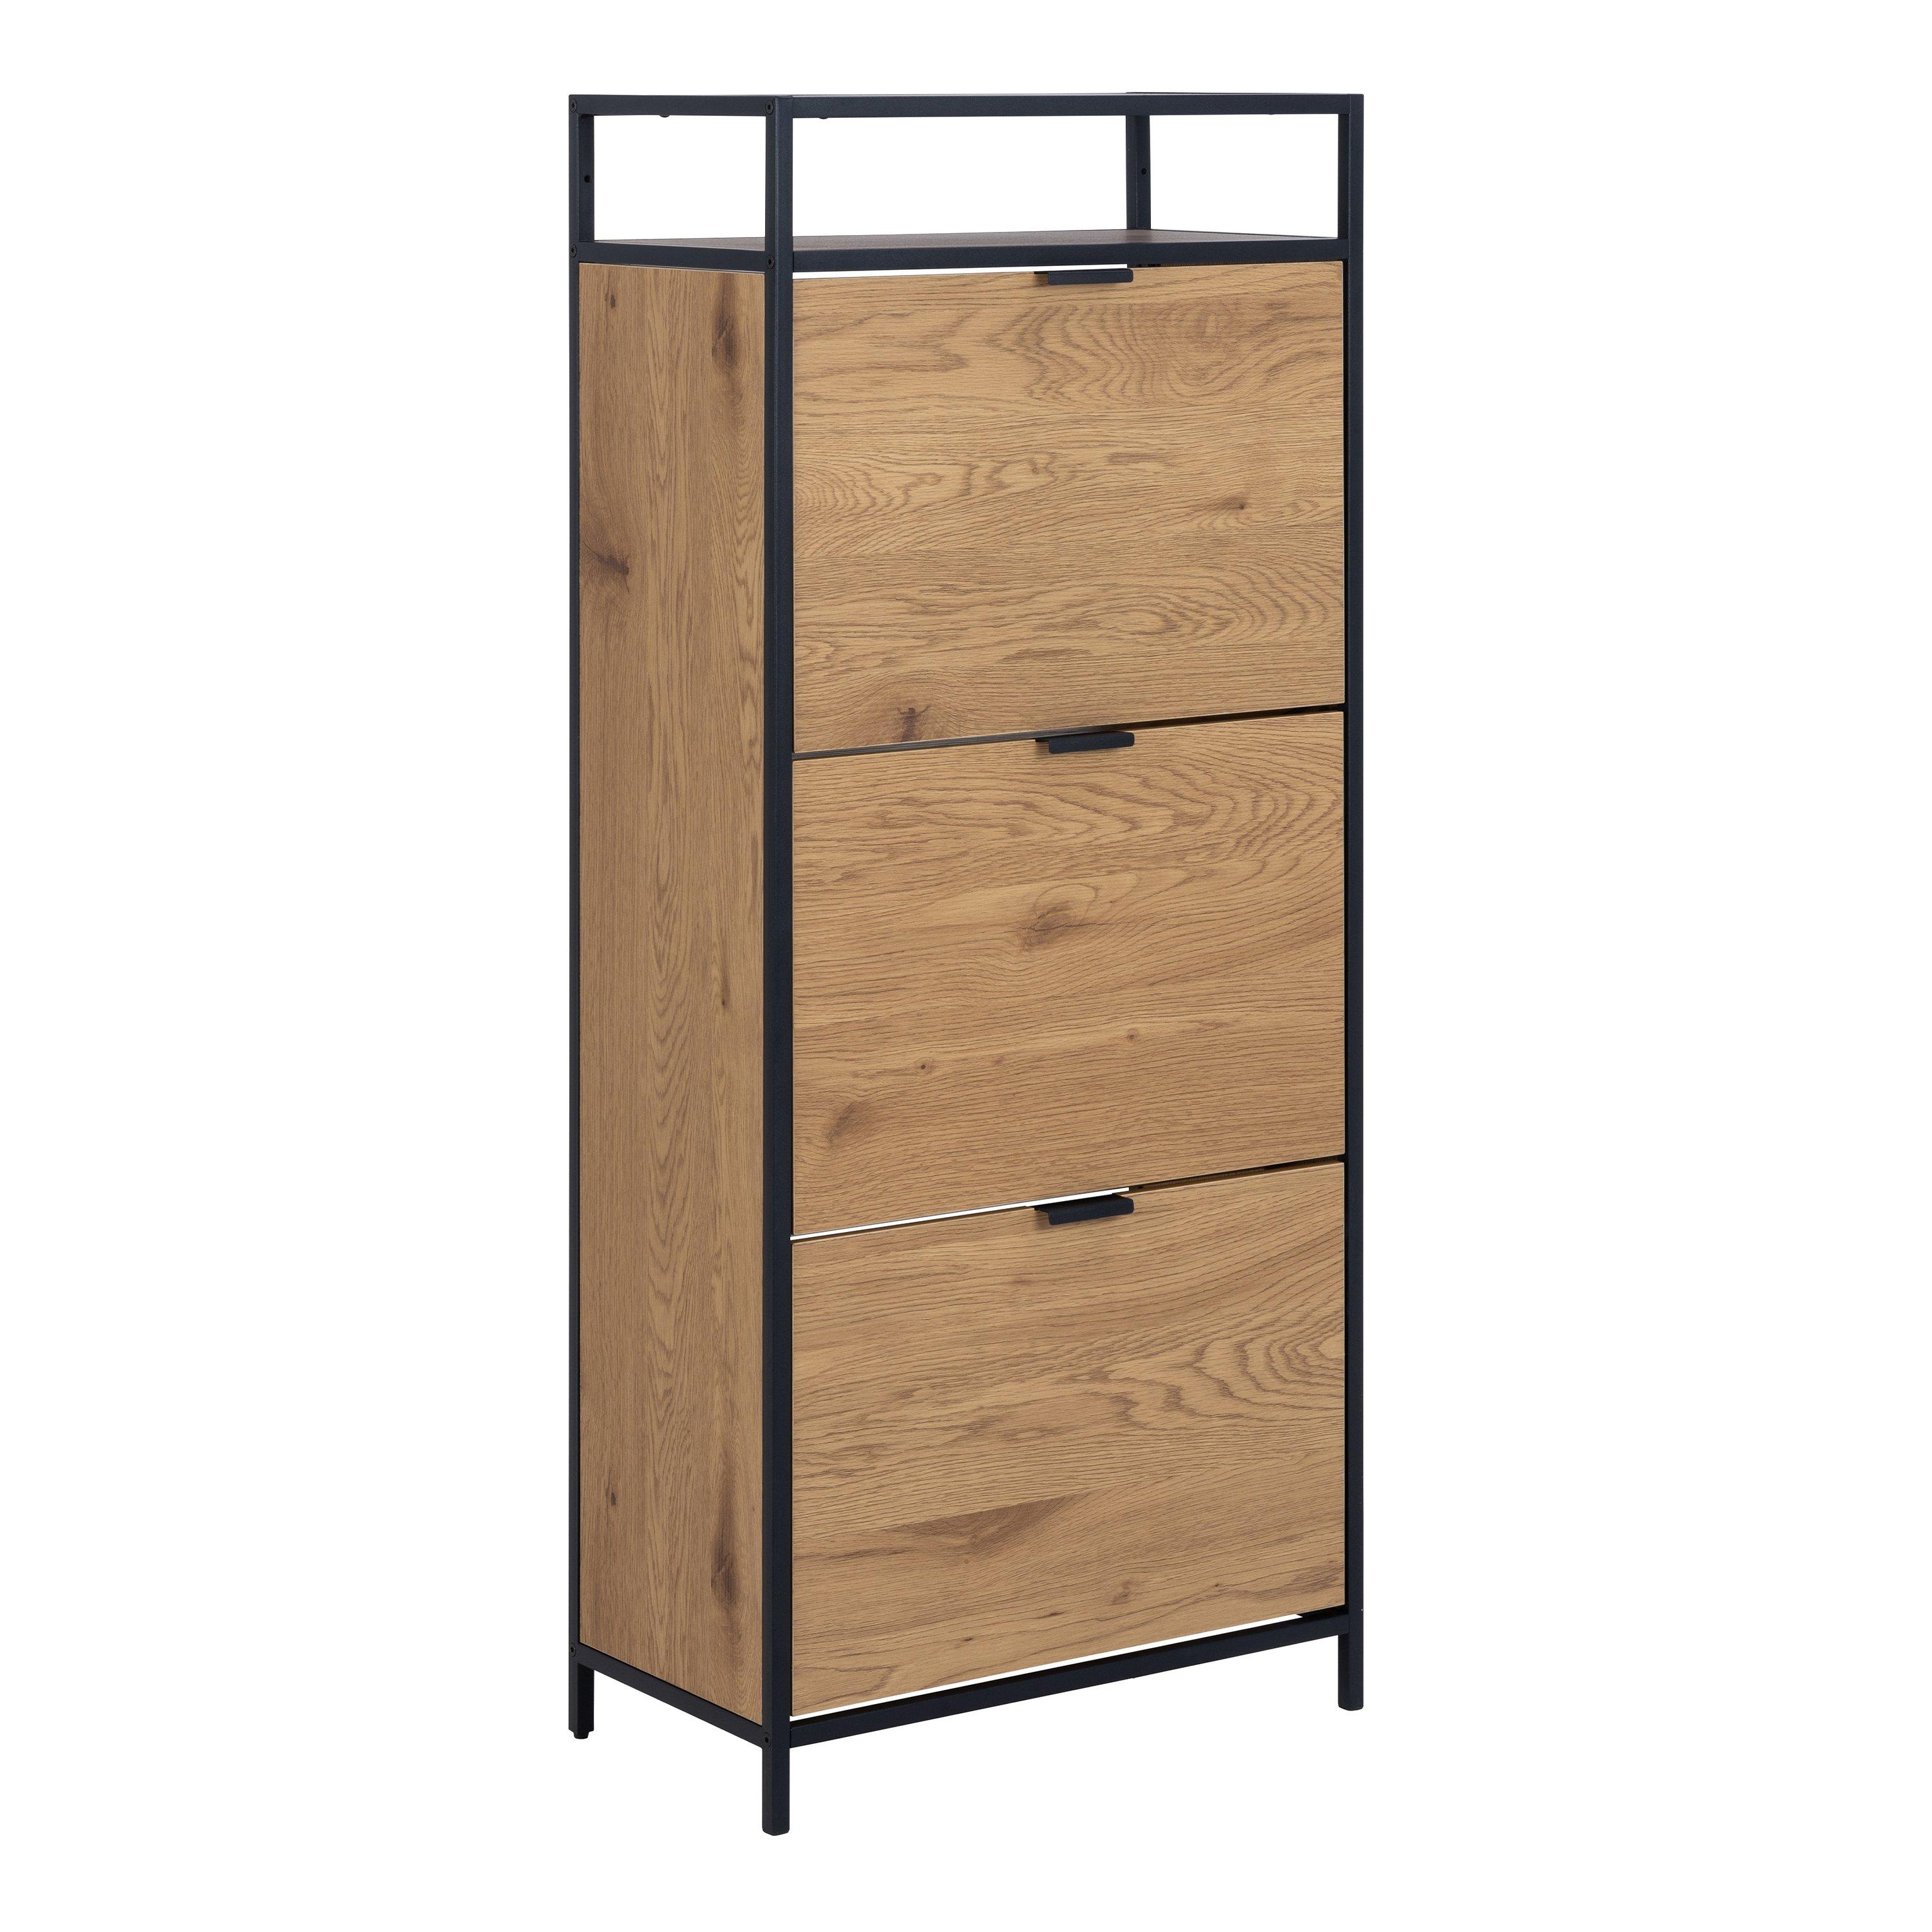 Photos - Storage Сabinet Seaford Shoe Cabinet in Black and Oak